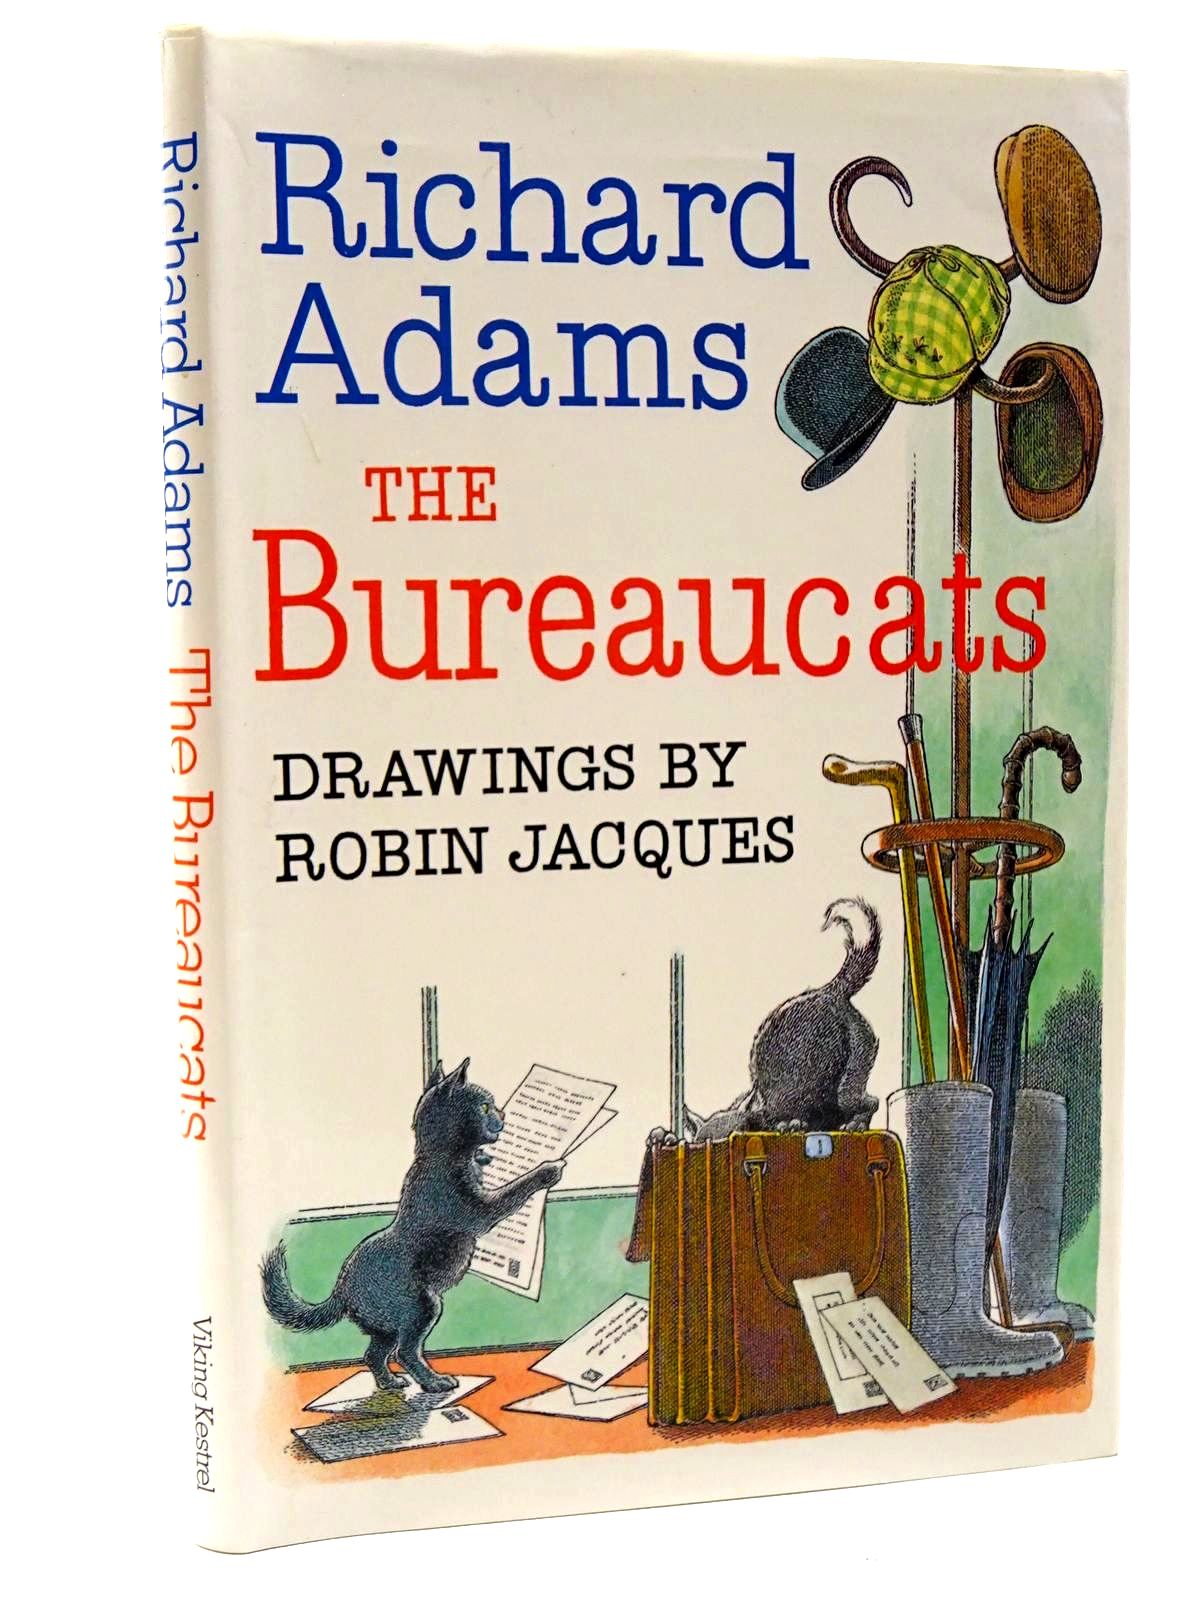 Cover of THE BUREAUCATS by Richard Adams